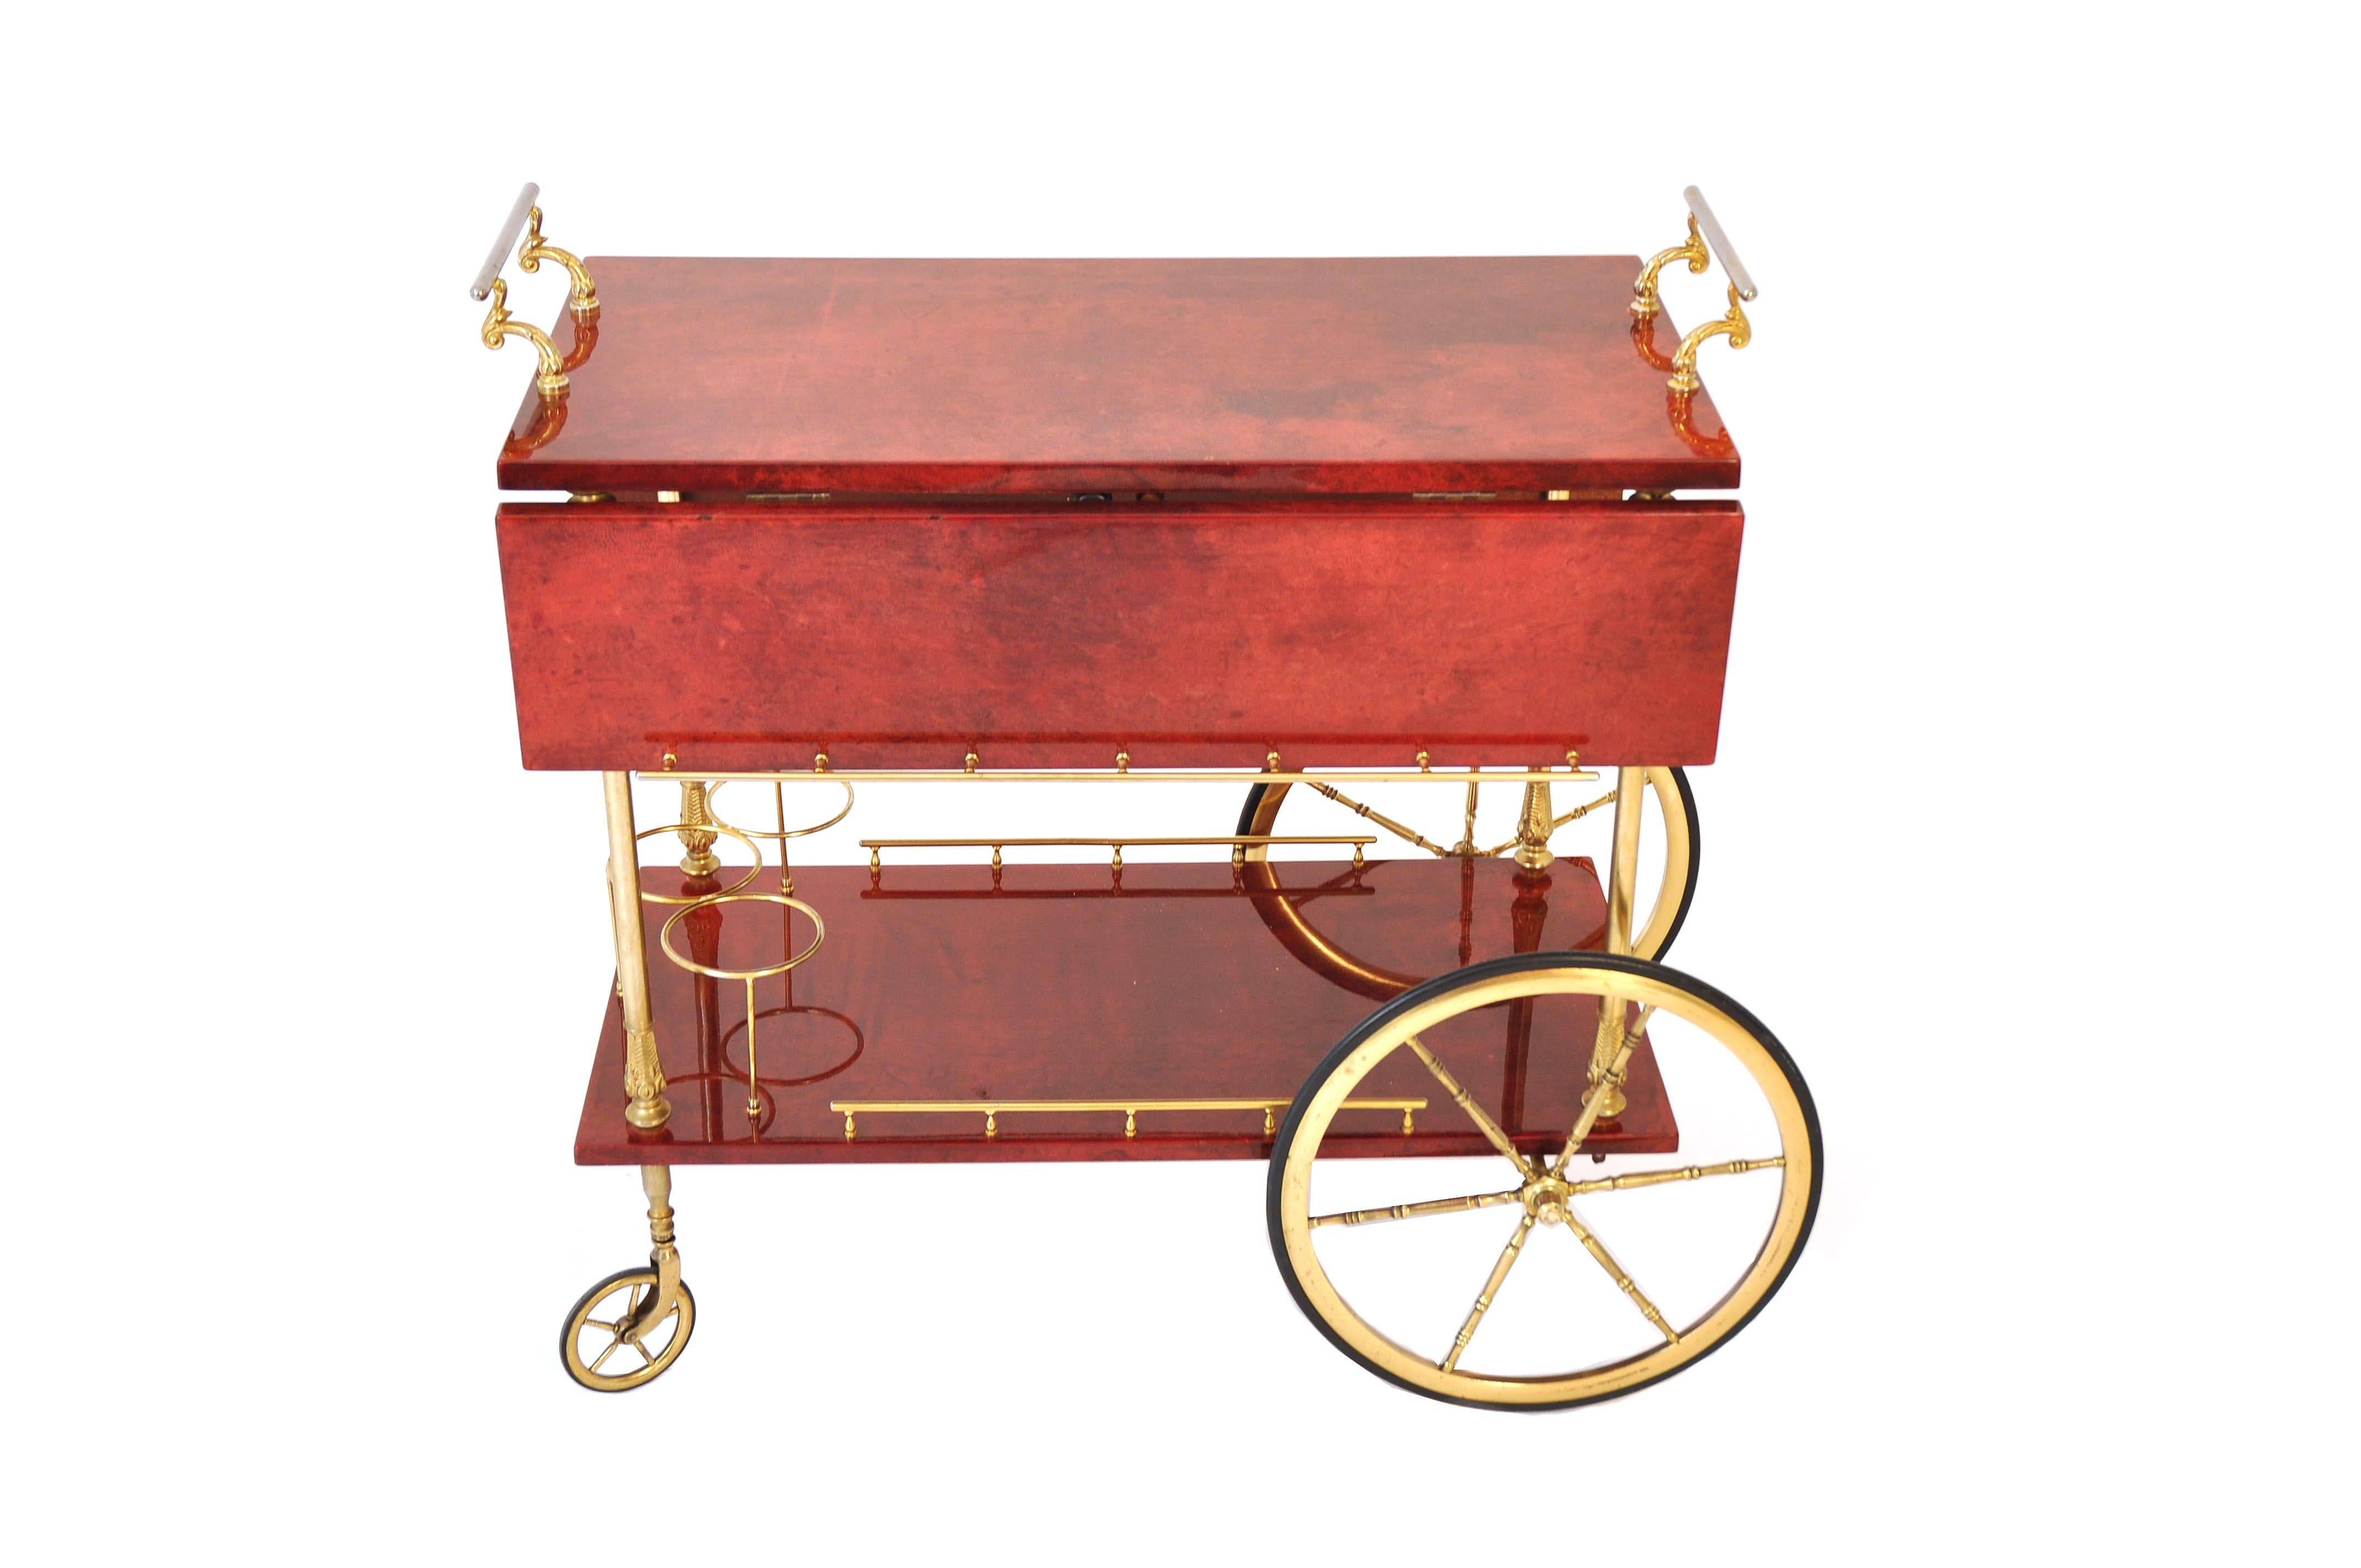 This serving cart was manufactured in Italy by Aldo Tura in 1950s. It is covered with goat skin in red and the details are made of lacquered metal.